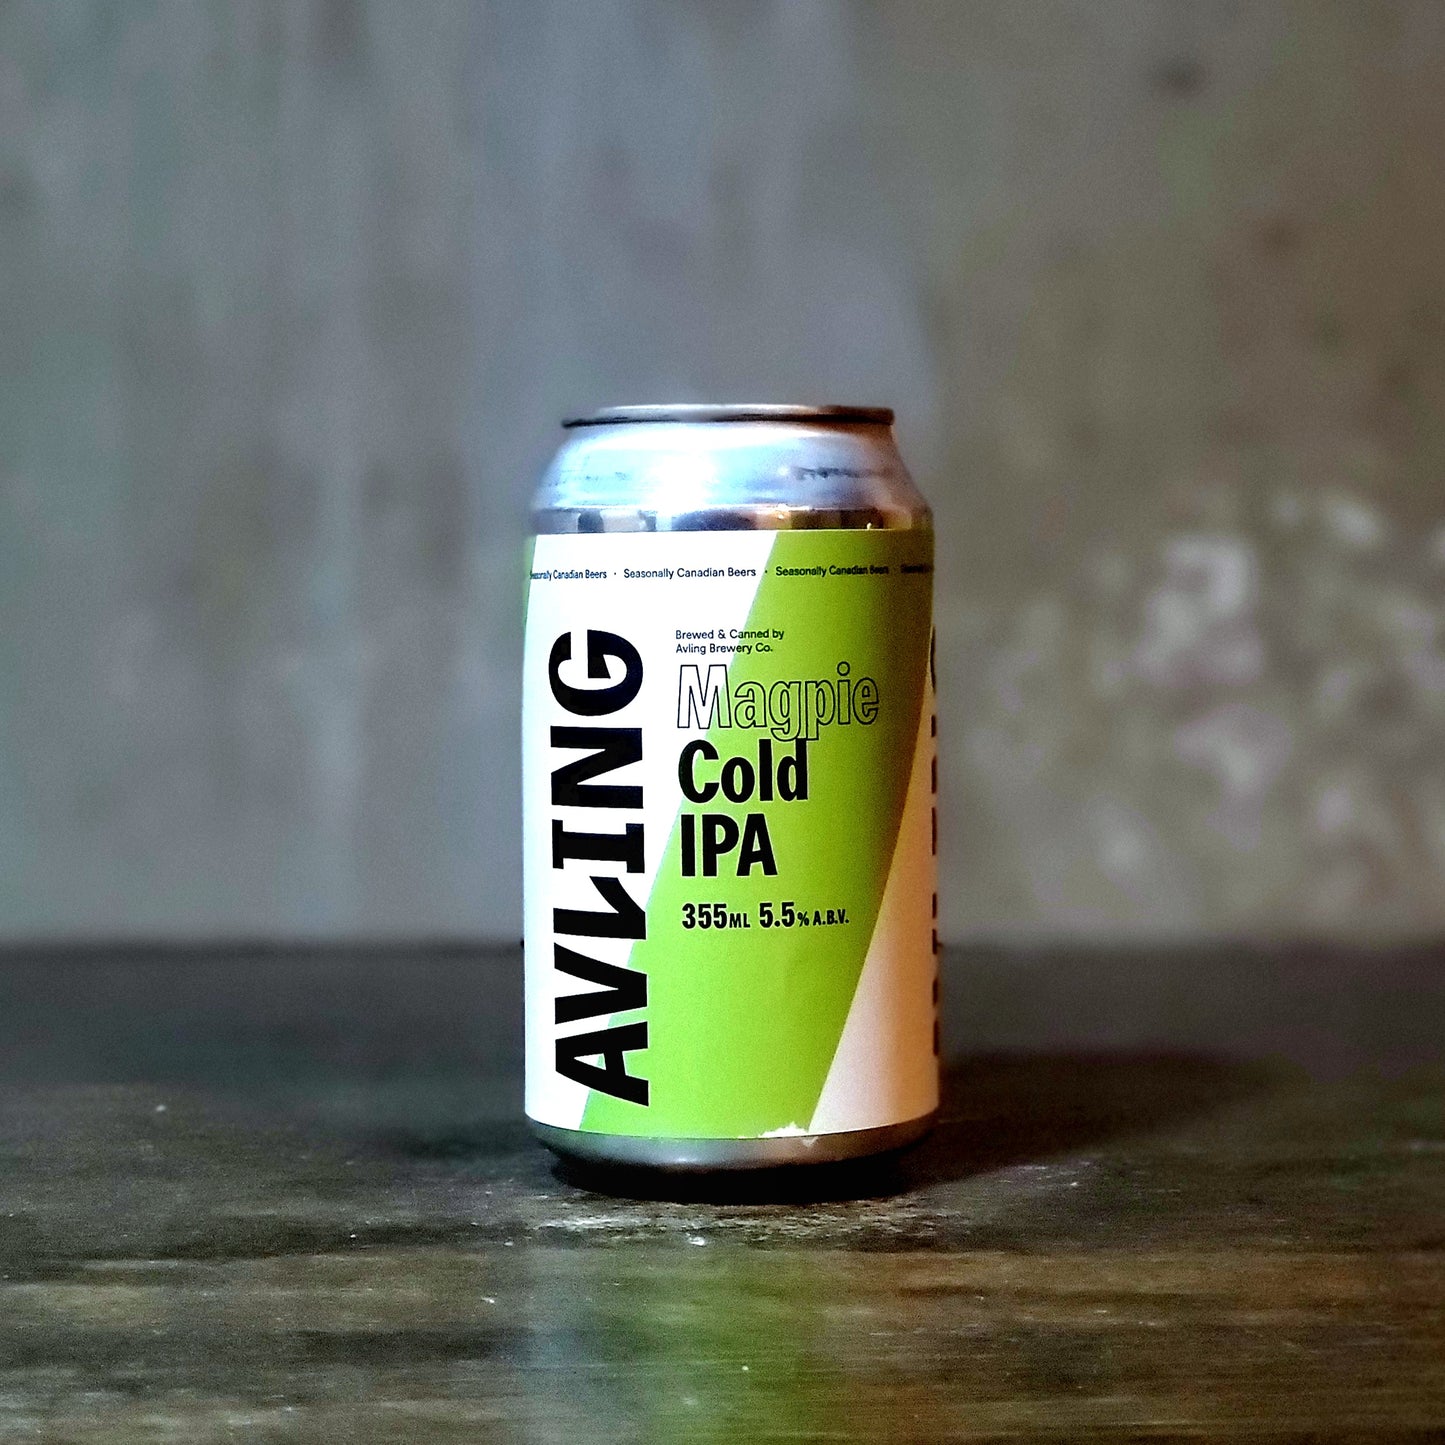 Avling "Magpie" Cold IPA